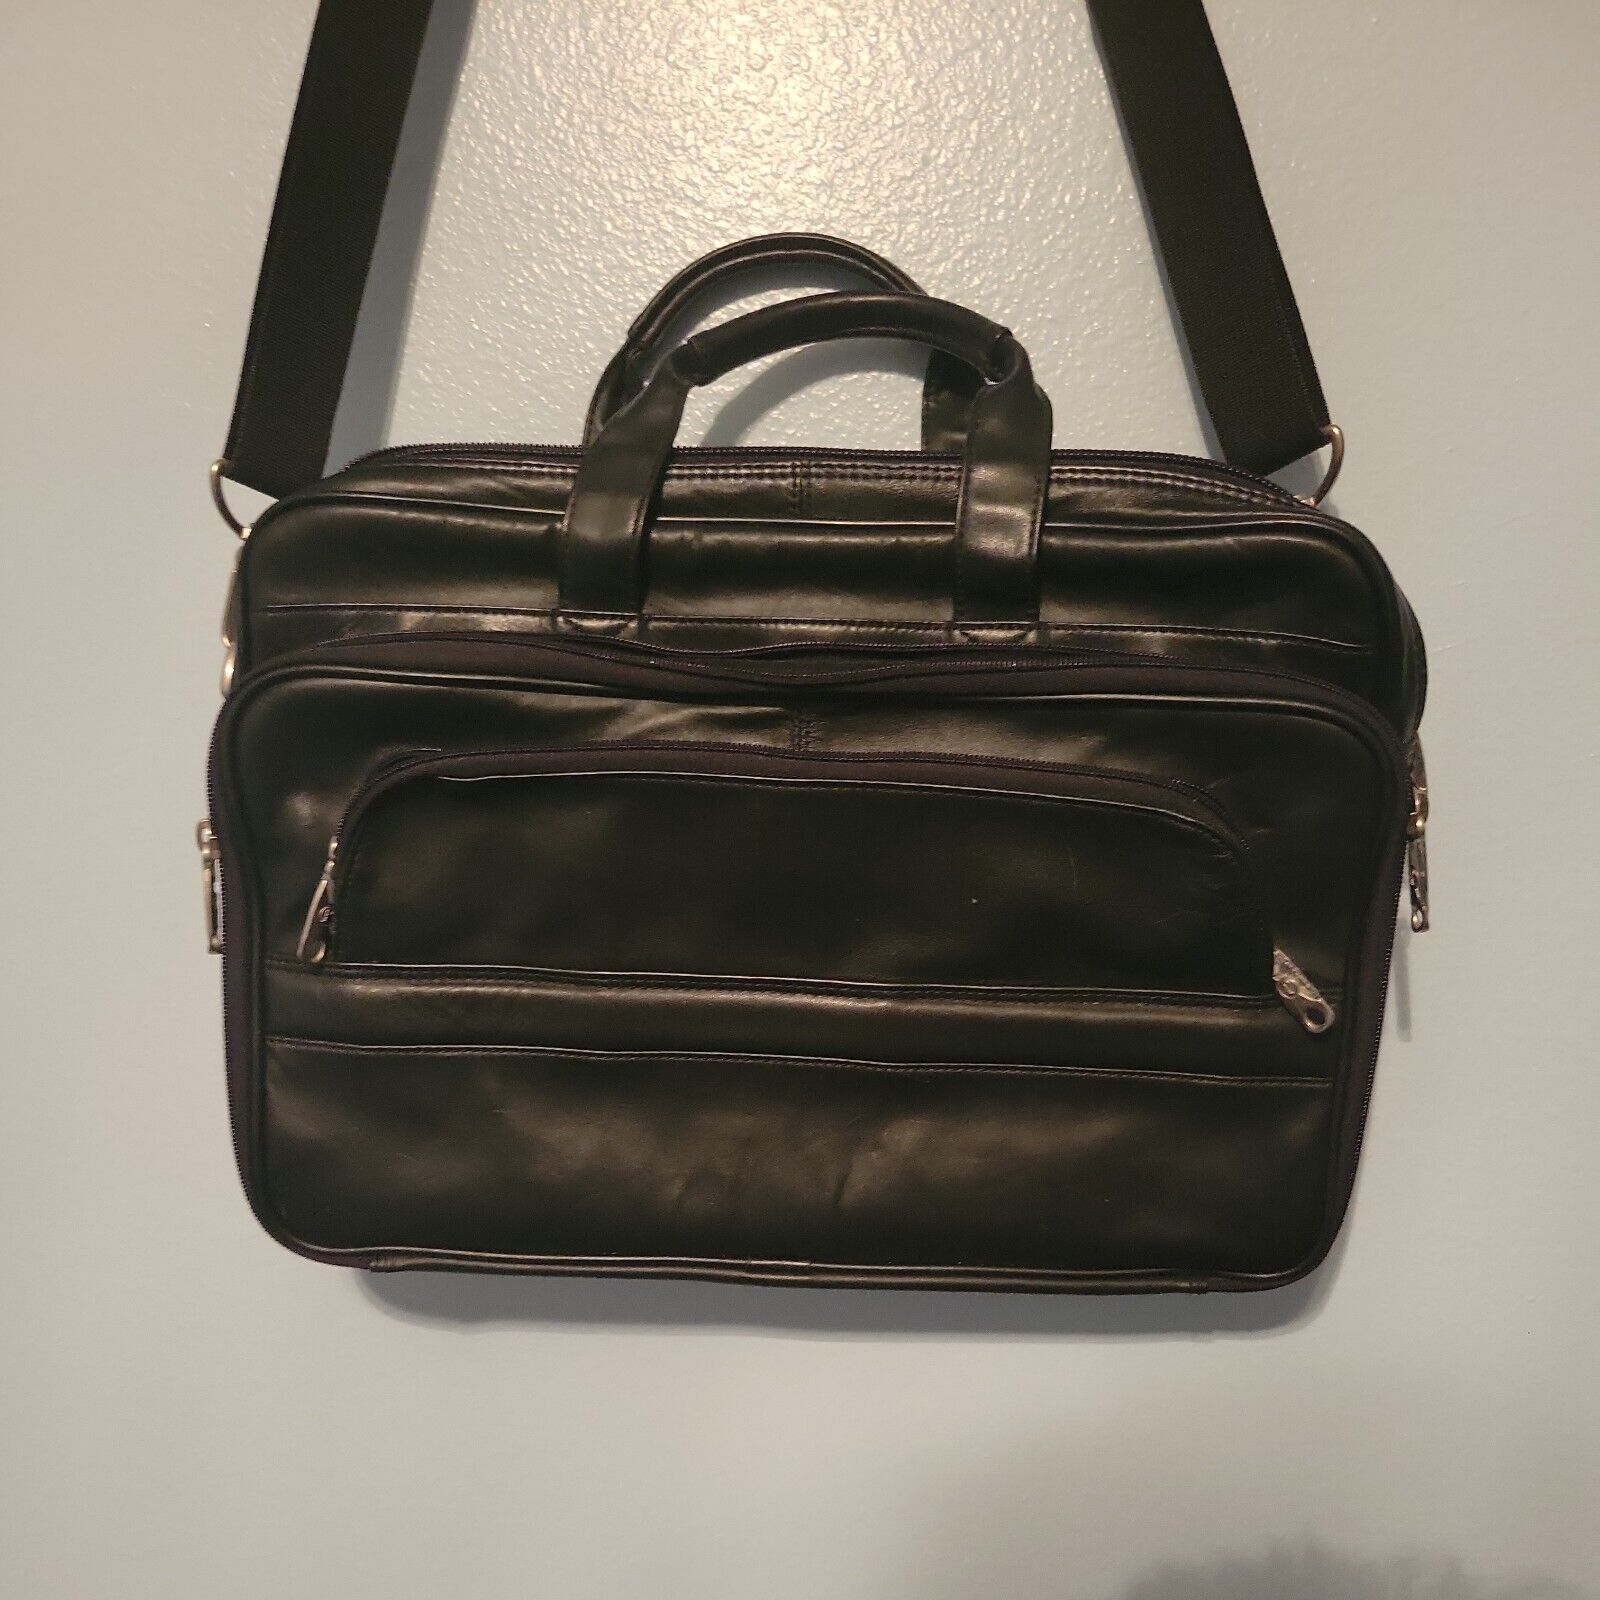 Protocol Leather Computer Bag. Hardly used.